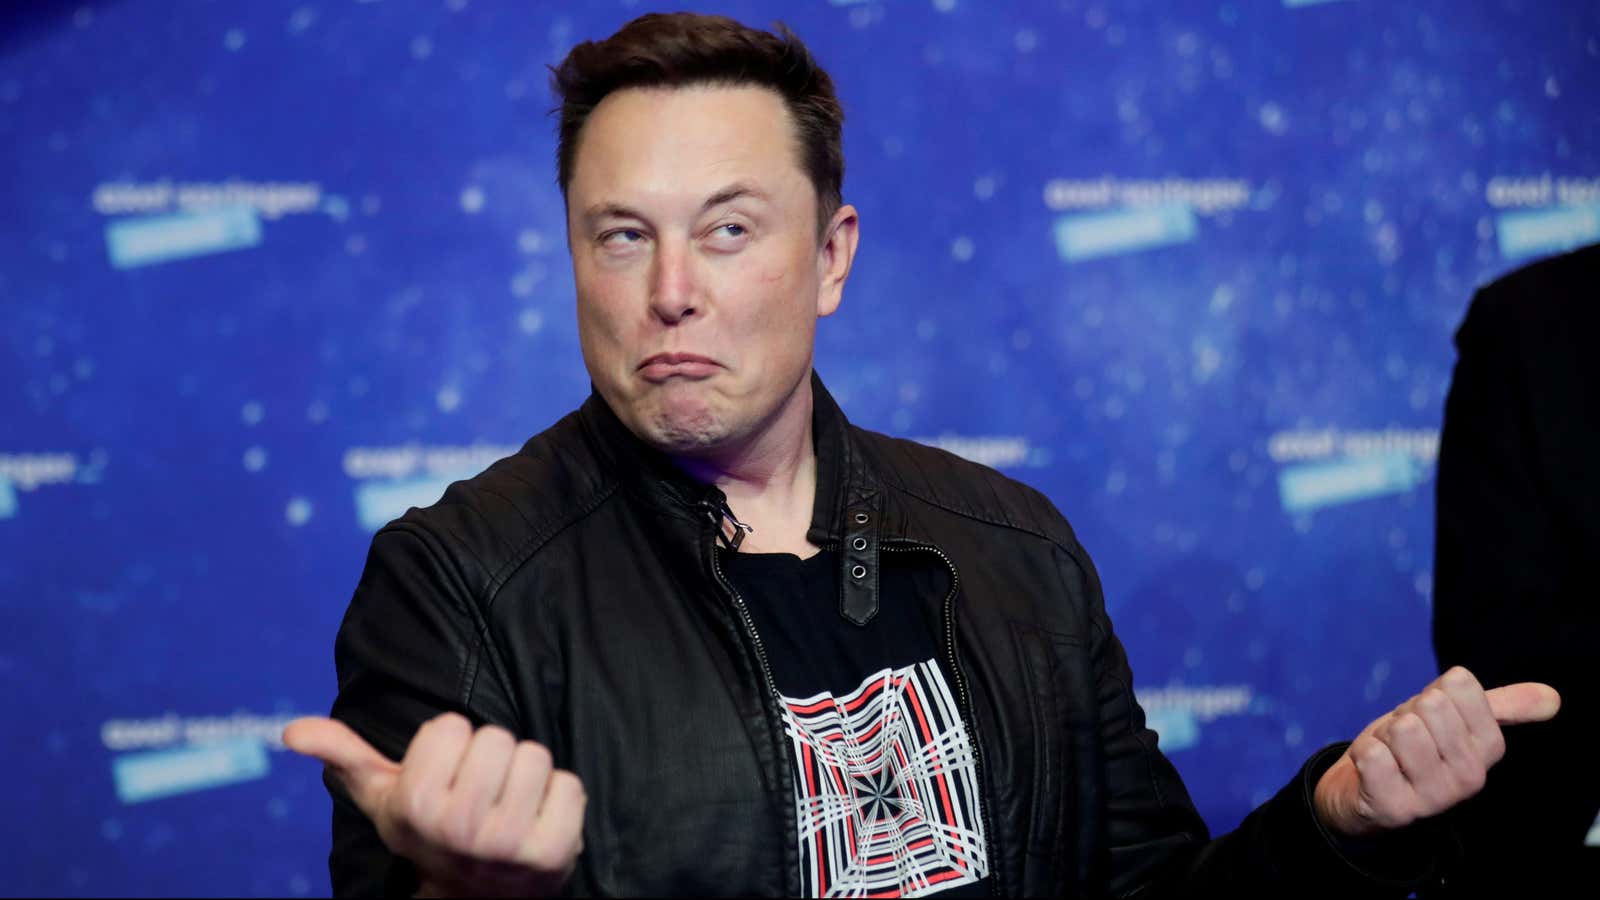 Elon Musk is well-known for his Twitter antics.